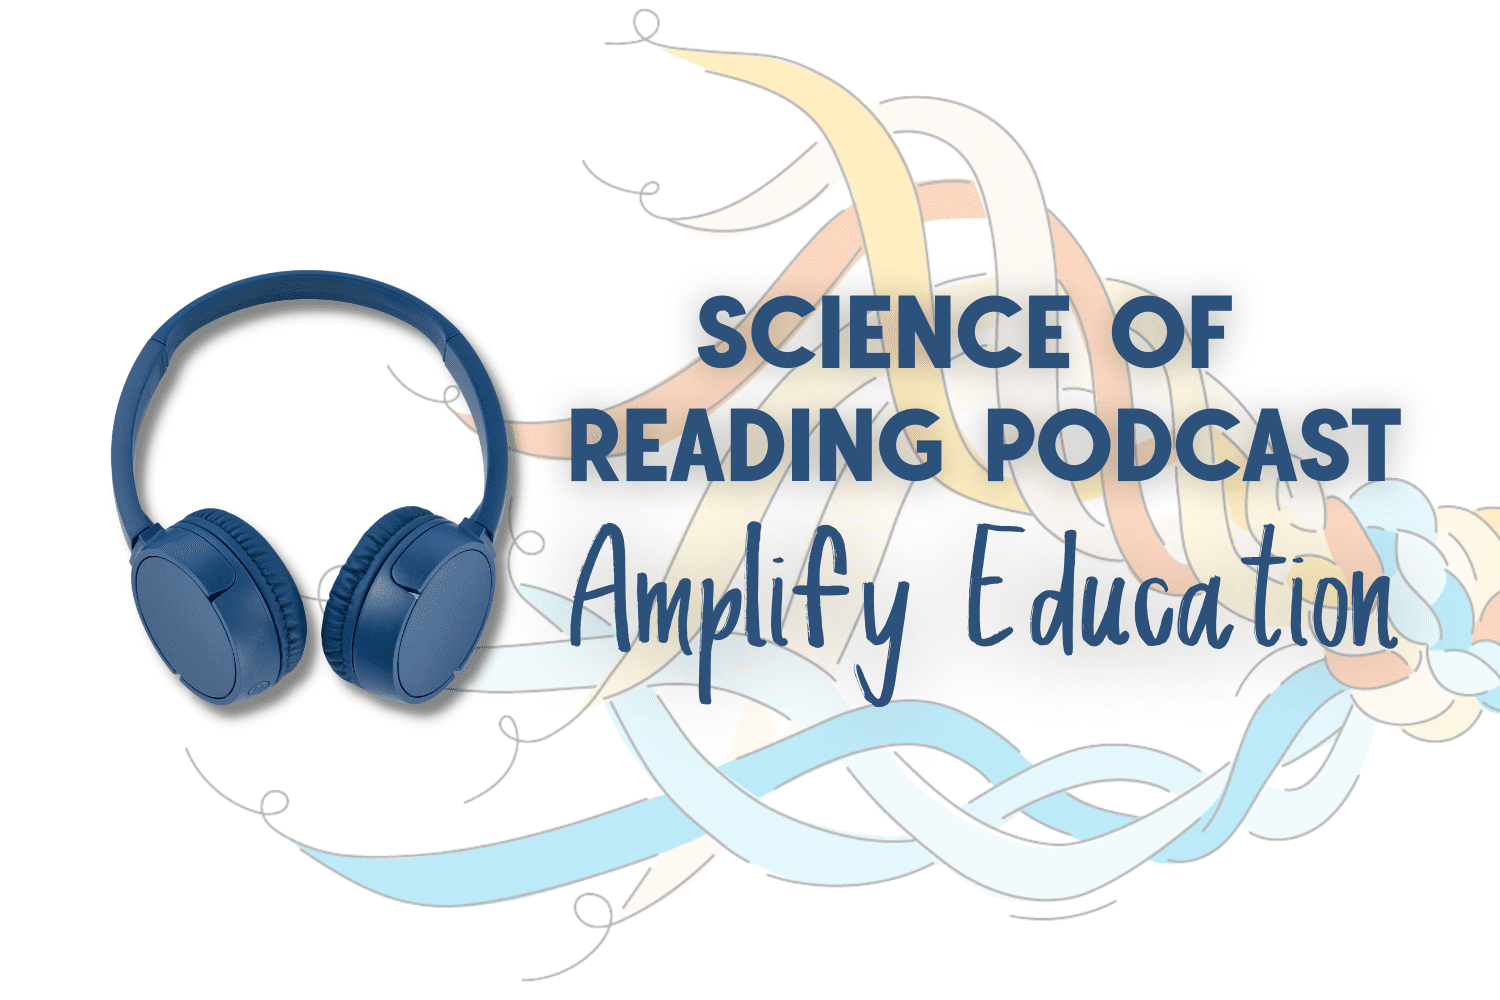 Science of Reading Podcast - Amplify Education